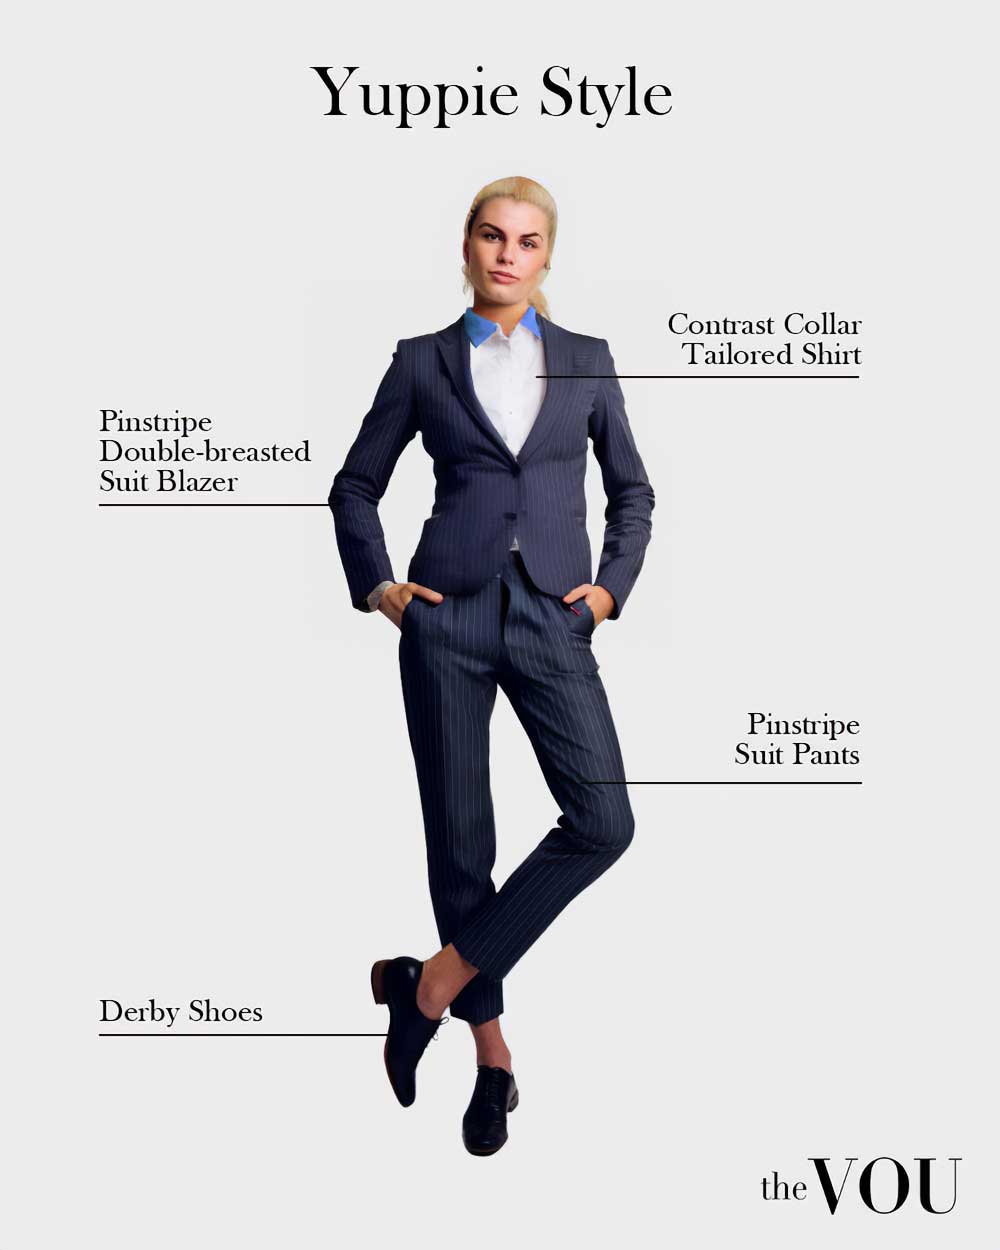 Dylan Mulvaney Yuppie style outfit